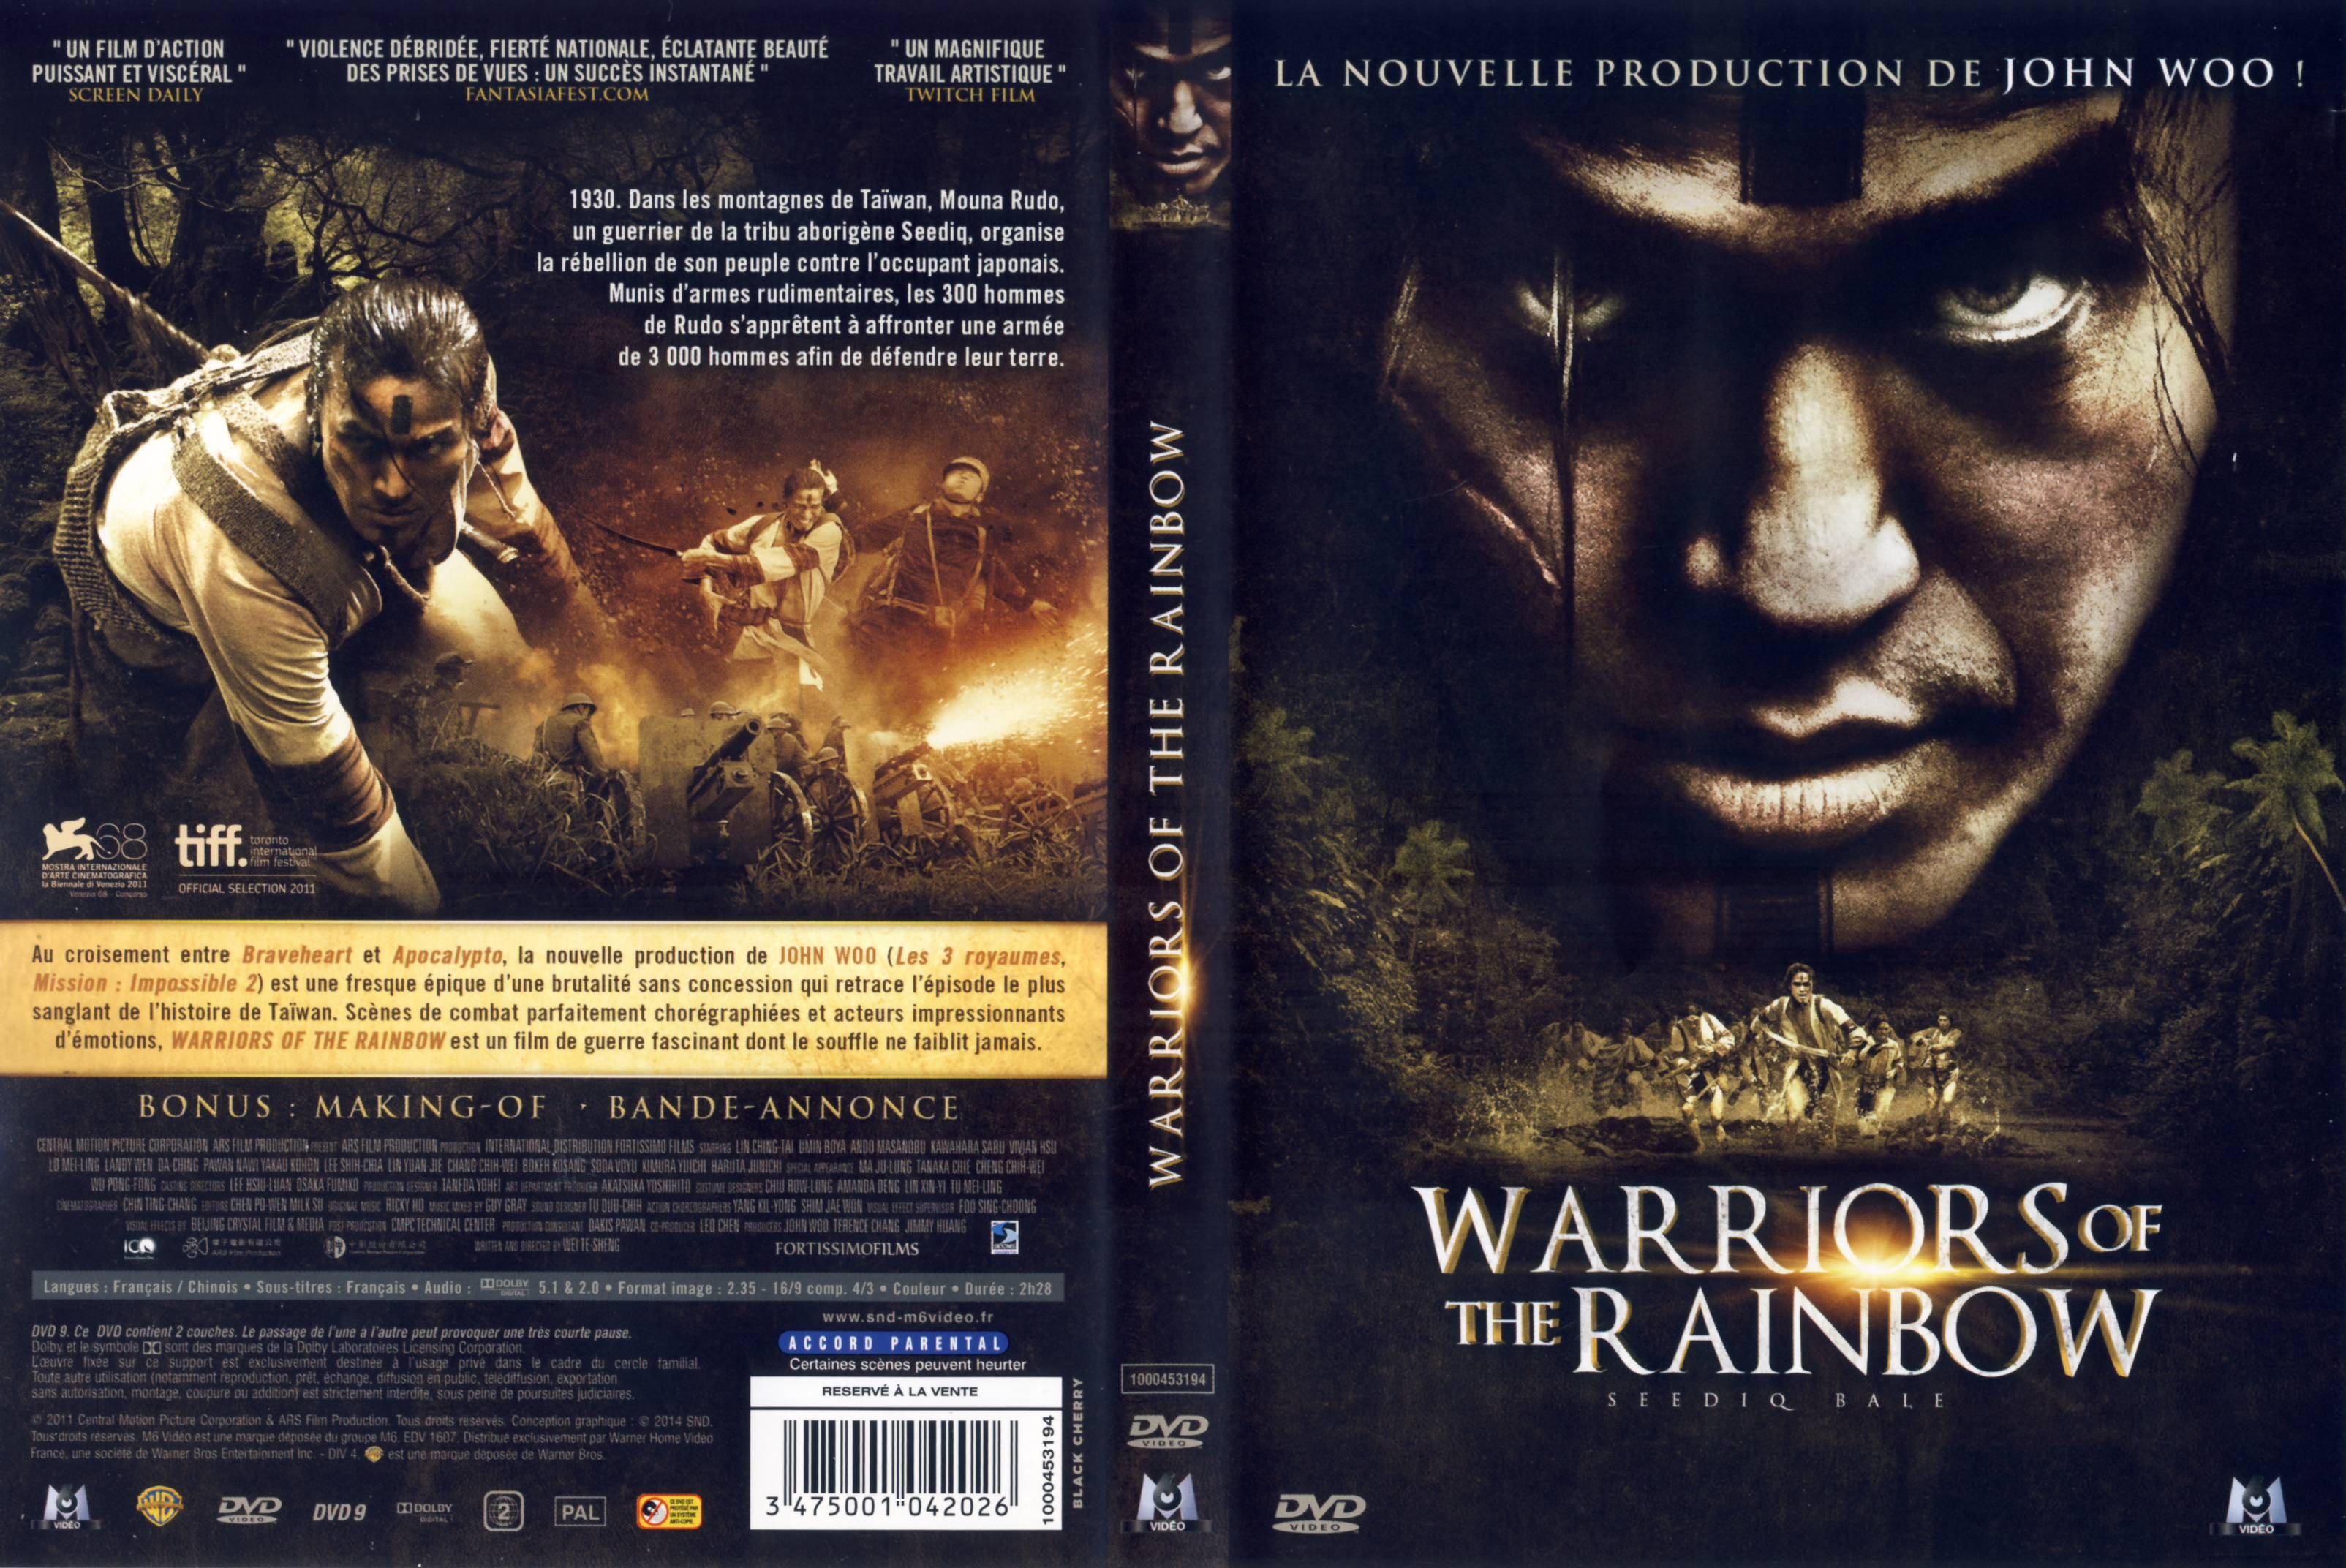 Jaquette DVD Warriors of the rainbow